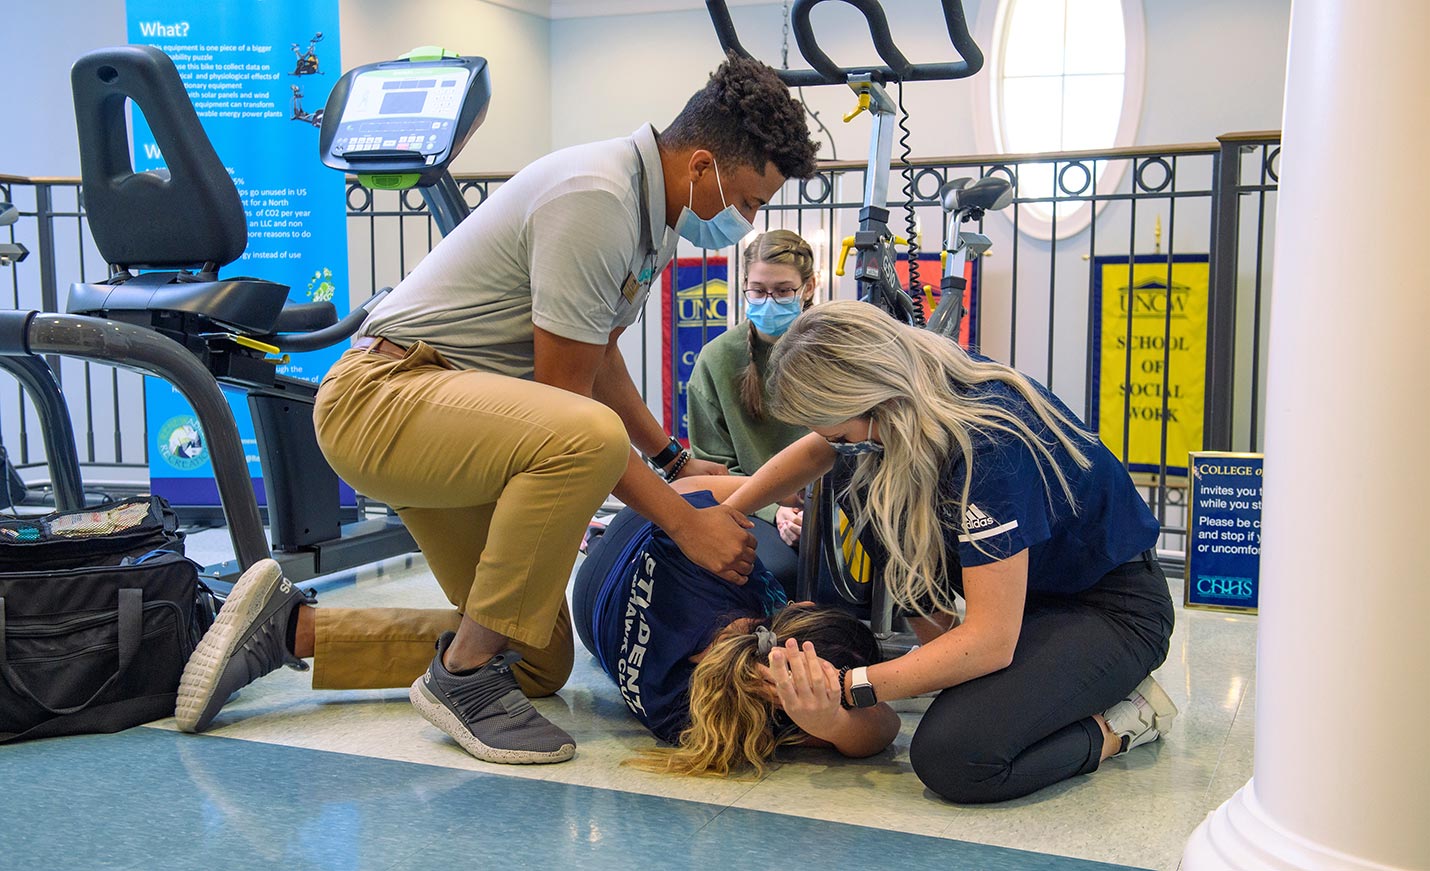 Two athletic training students practice treating an injured patient on the floor.